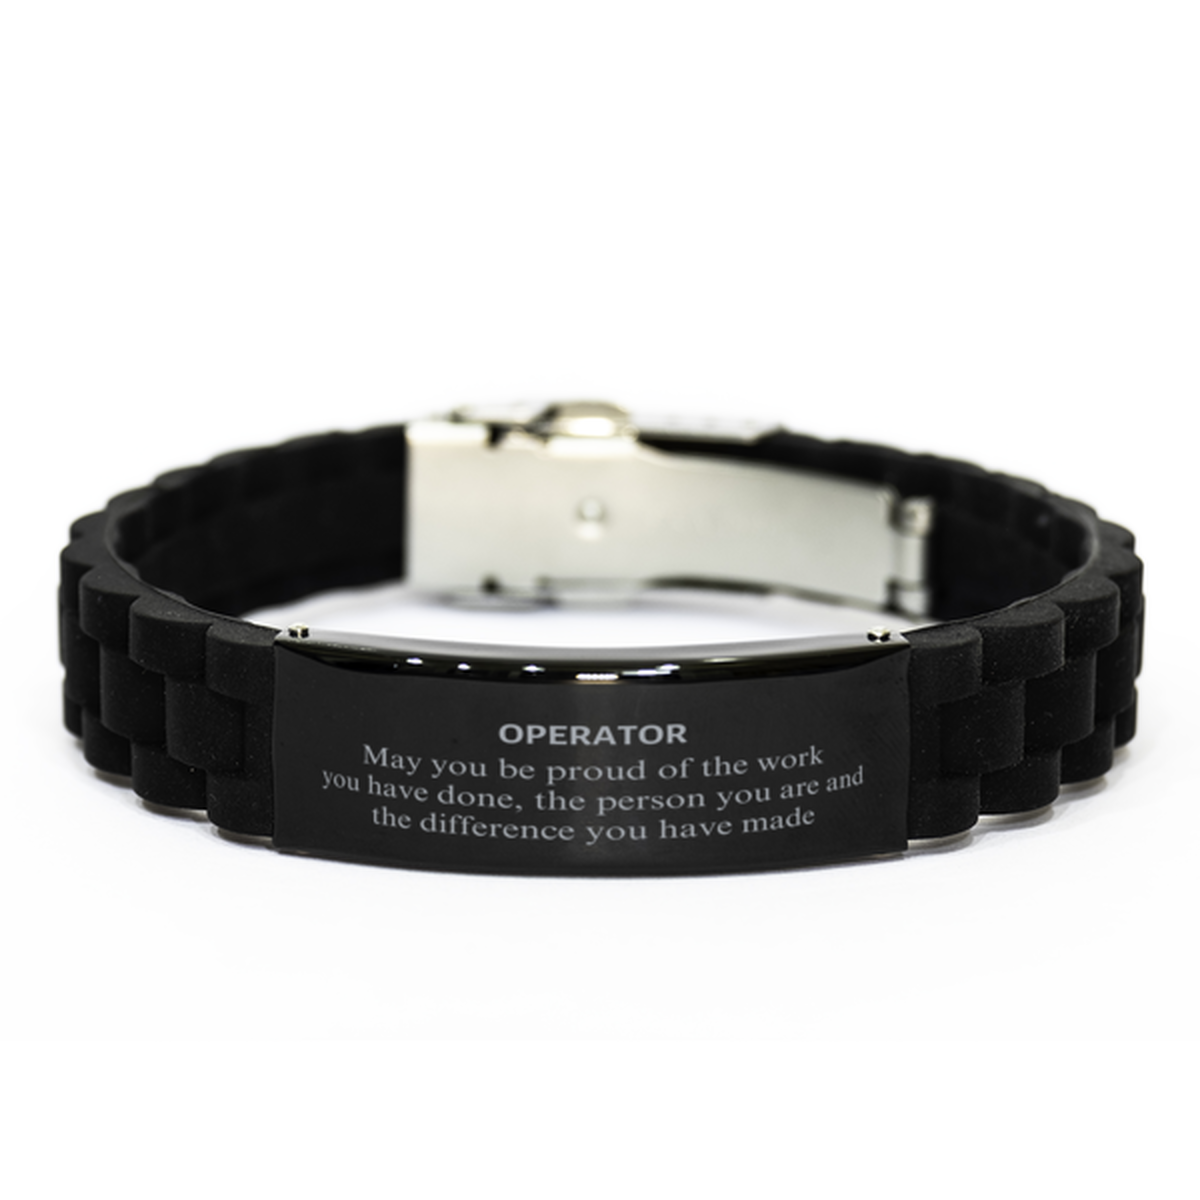 Operator May you be proud of the work you have done, Retirement Operator Black Glidelock Clasp Bracelet for Colleague Appreciation Gifts Amazing for Operator